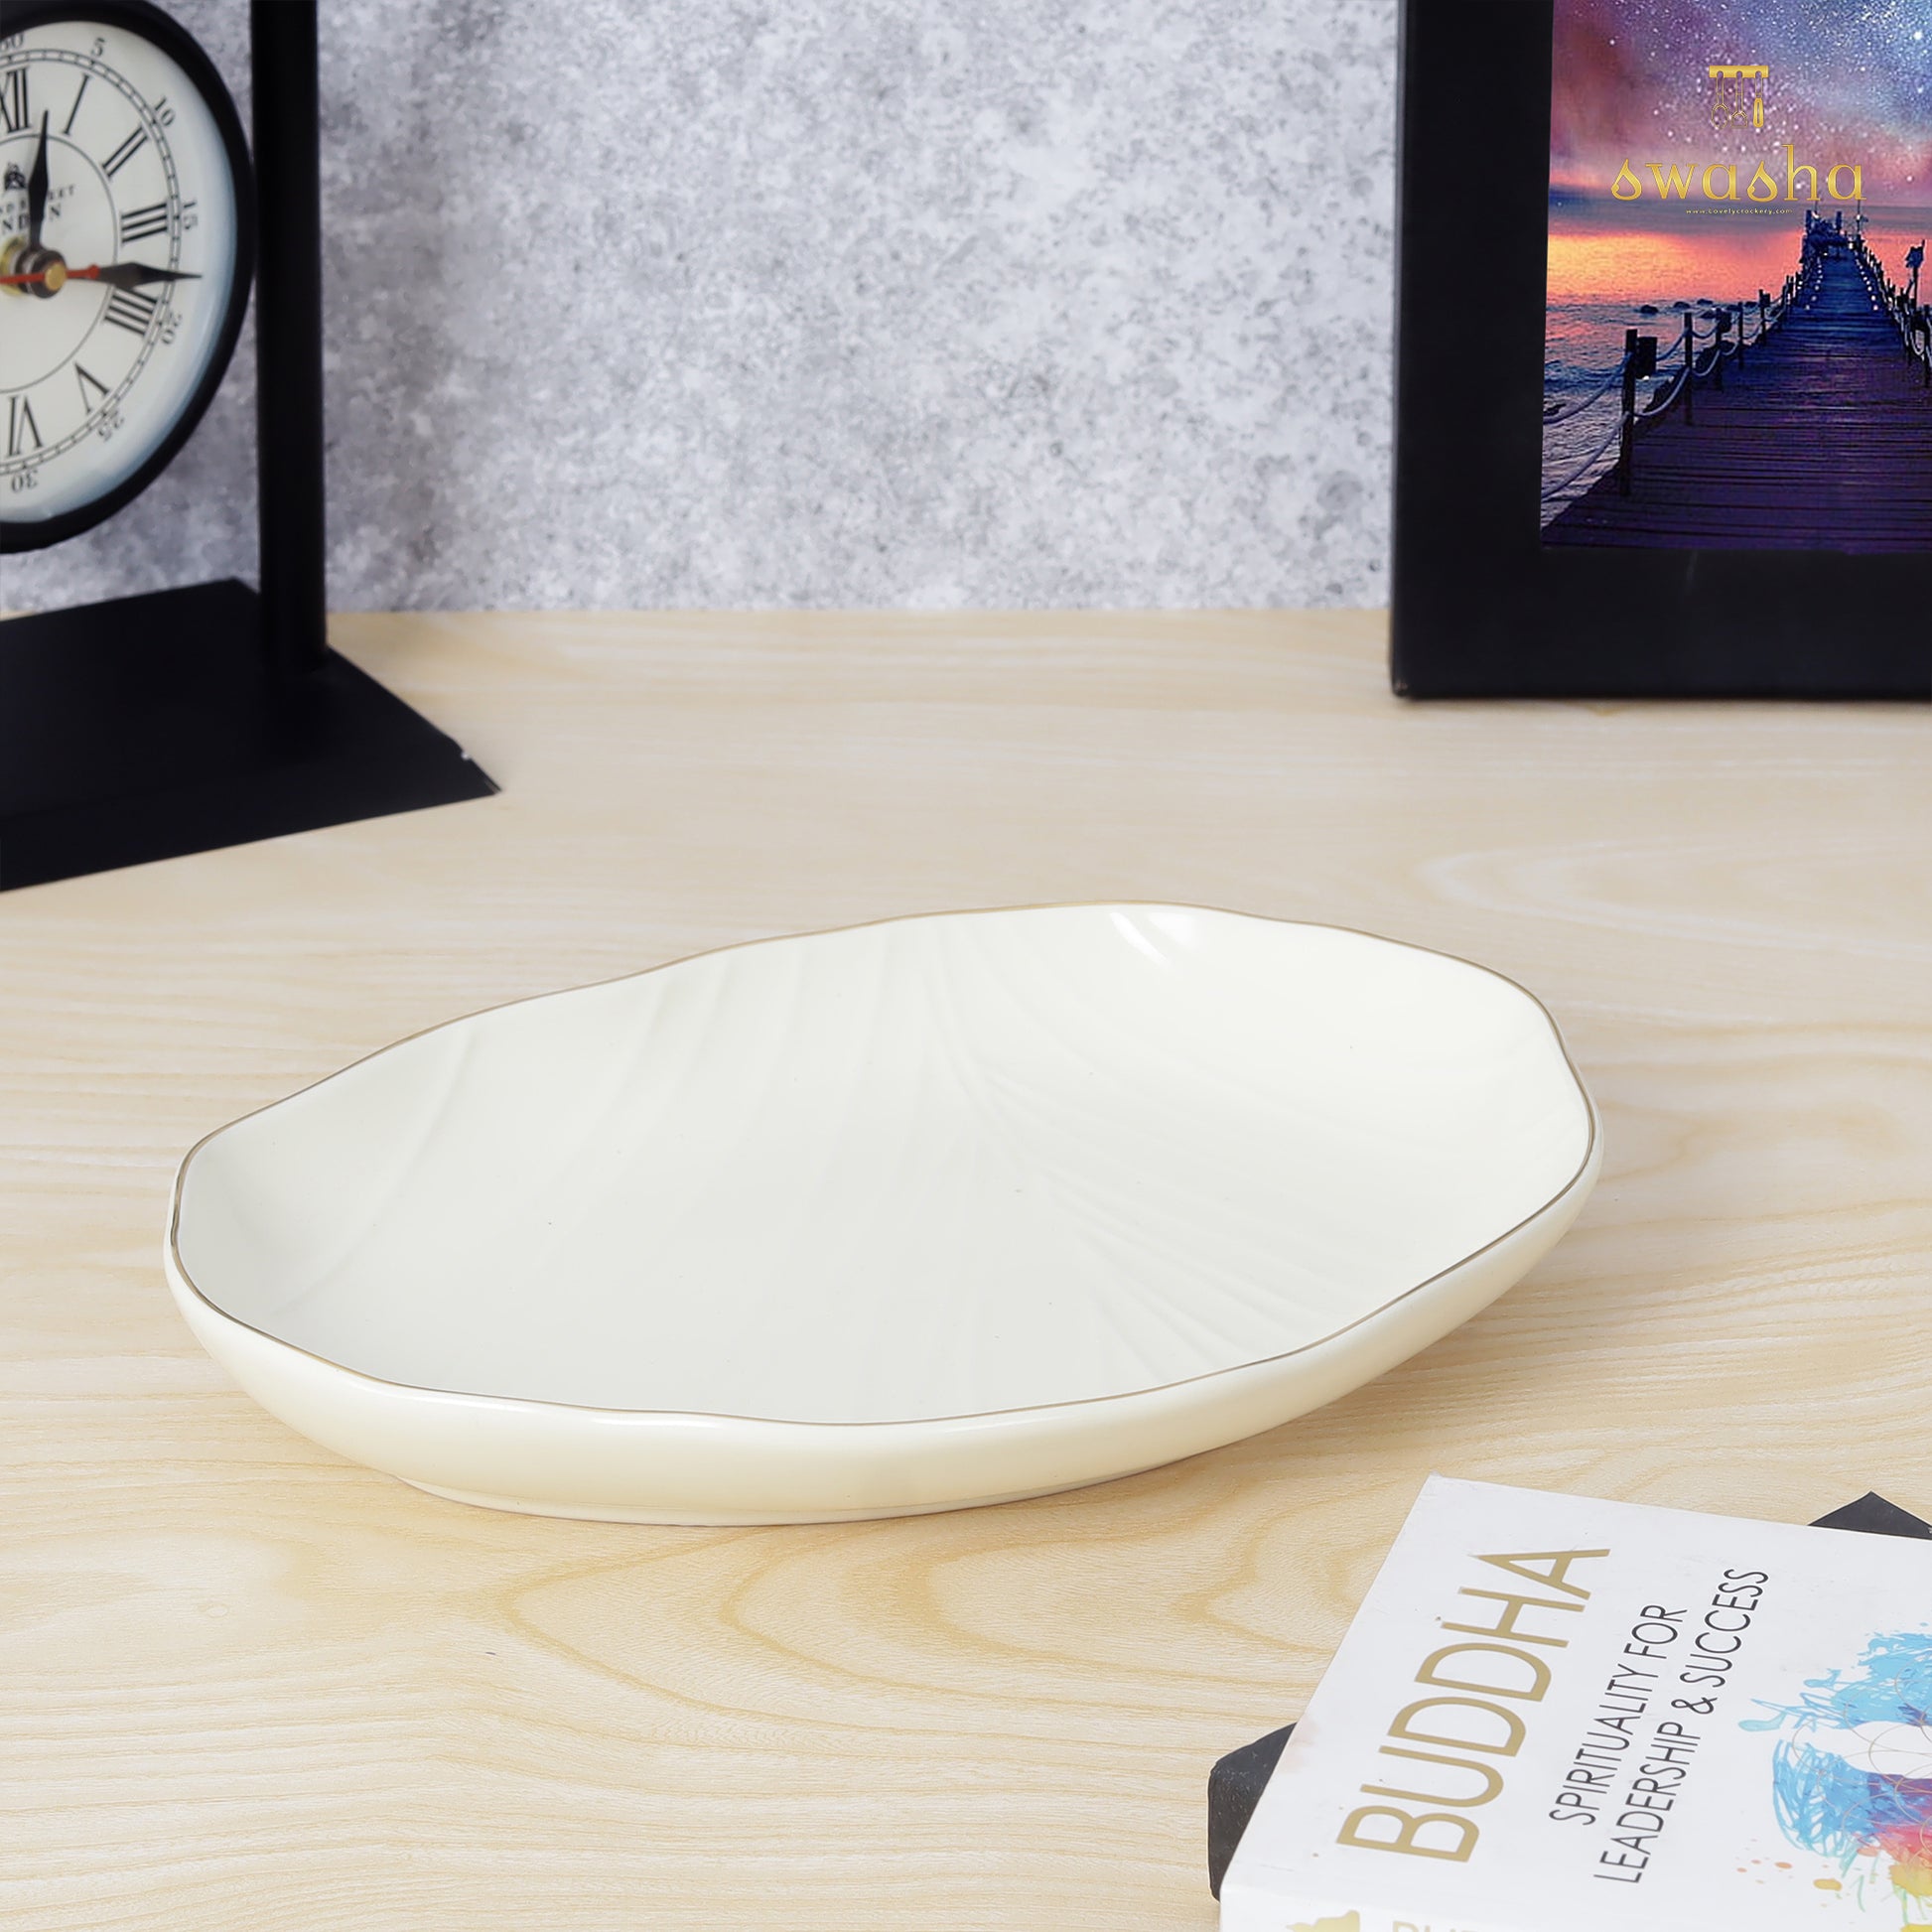 Ceramic snack plate - ideal for stylishly presenting delightful treats